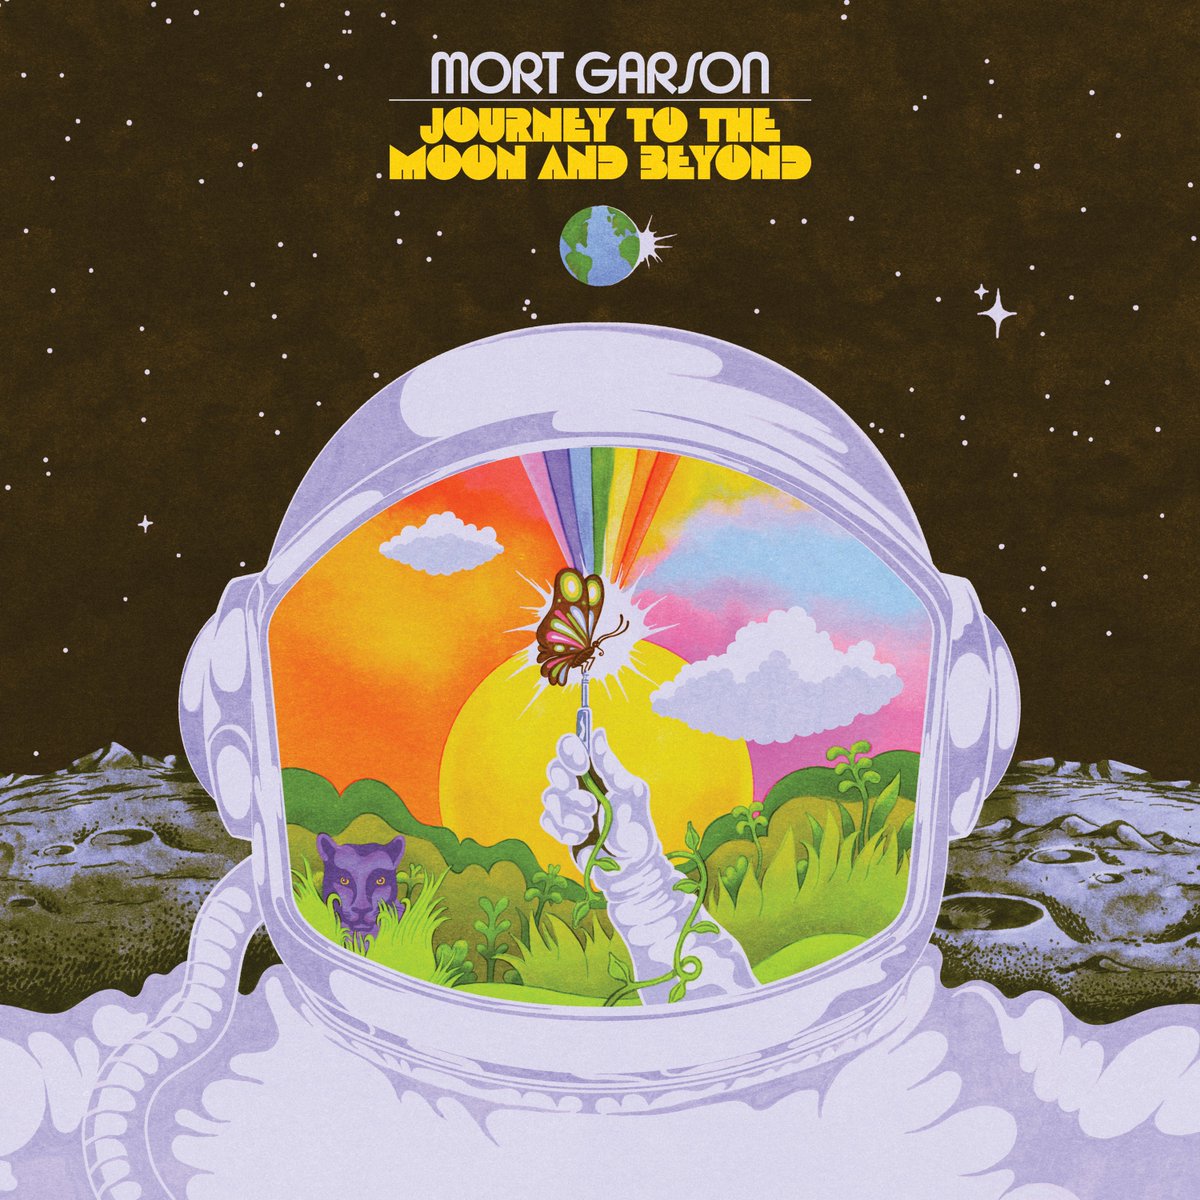 🌖 I made the artwork for another compilation of unreleased Mort Garson rarities- “Journey to the Moon And Beyond”. Lots of selections from the Patch Cord Productions archives, including Mort’s soundtrack for the Apollo 11 moonlanding TV Broadcast. 
Out in July on @SacredBones